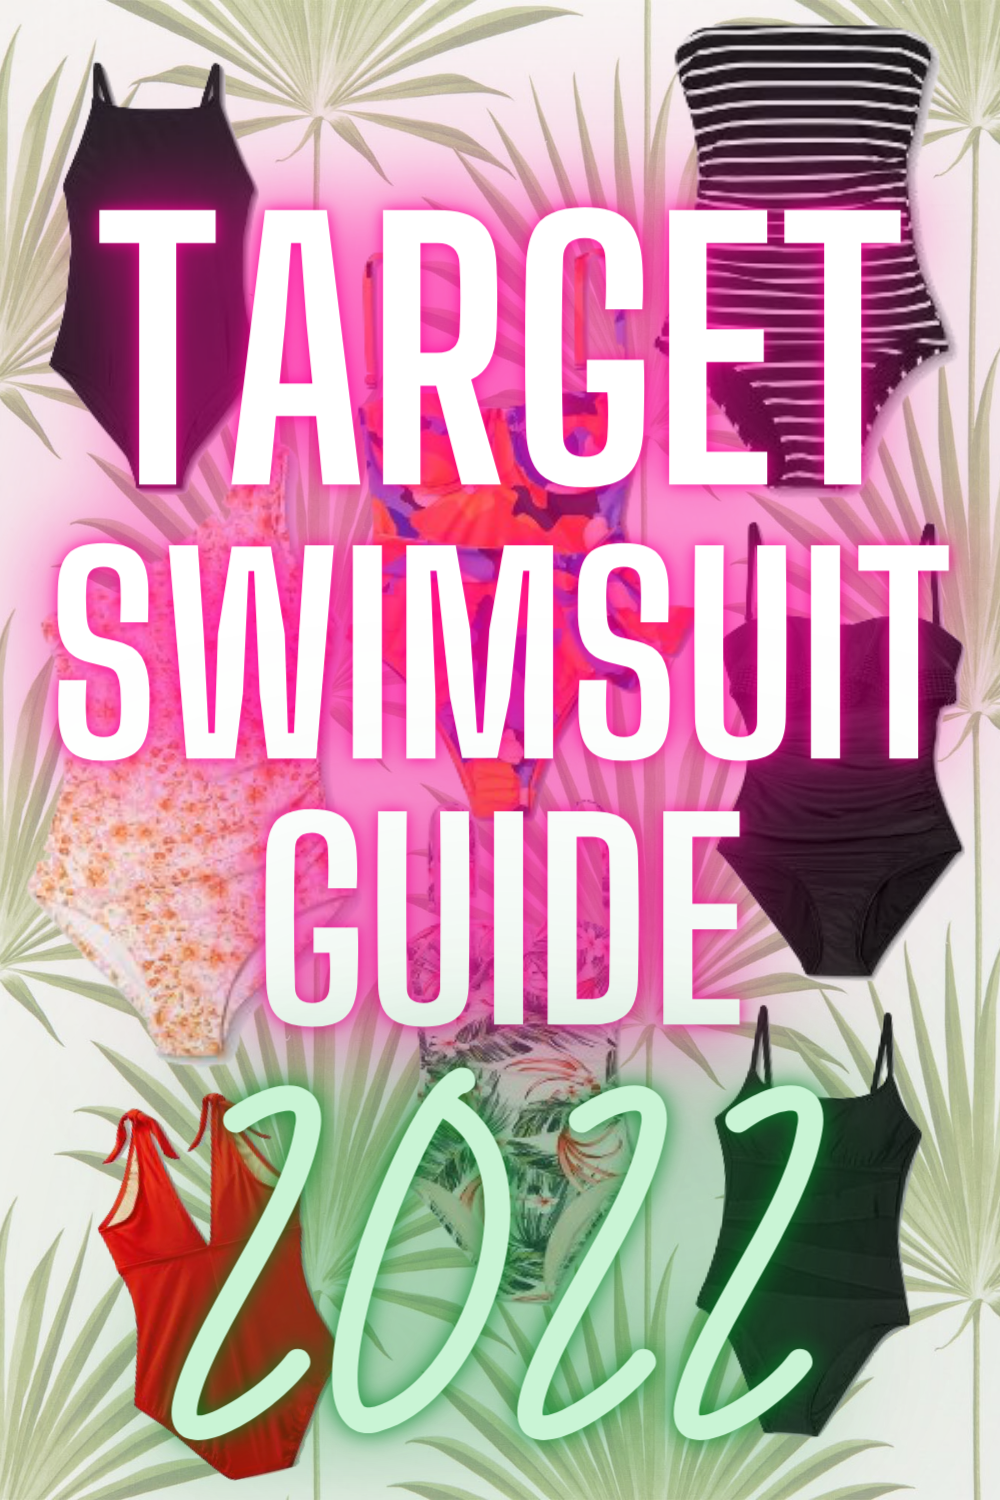 THE OFFICIAL GUIDE TO TARGET SWIMSUITS 2022 - A complete fit and style guide for Target's 2022 swimwear line including sizing + links! | Target Women's Swimsuits - Target Bikinis - One Piece Swimsuit Target - Target Swimsuits 2022